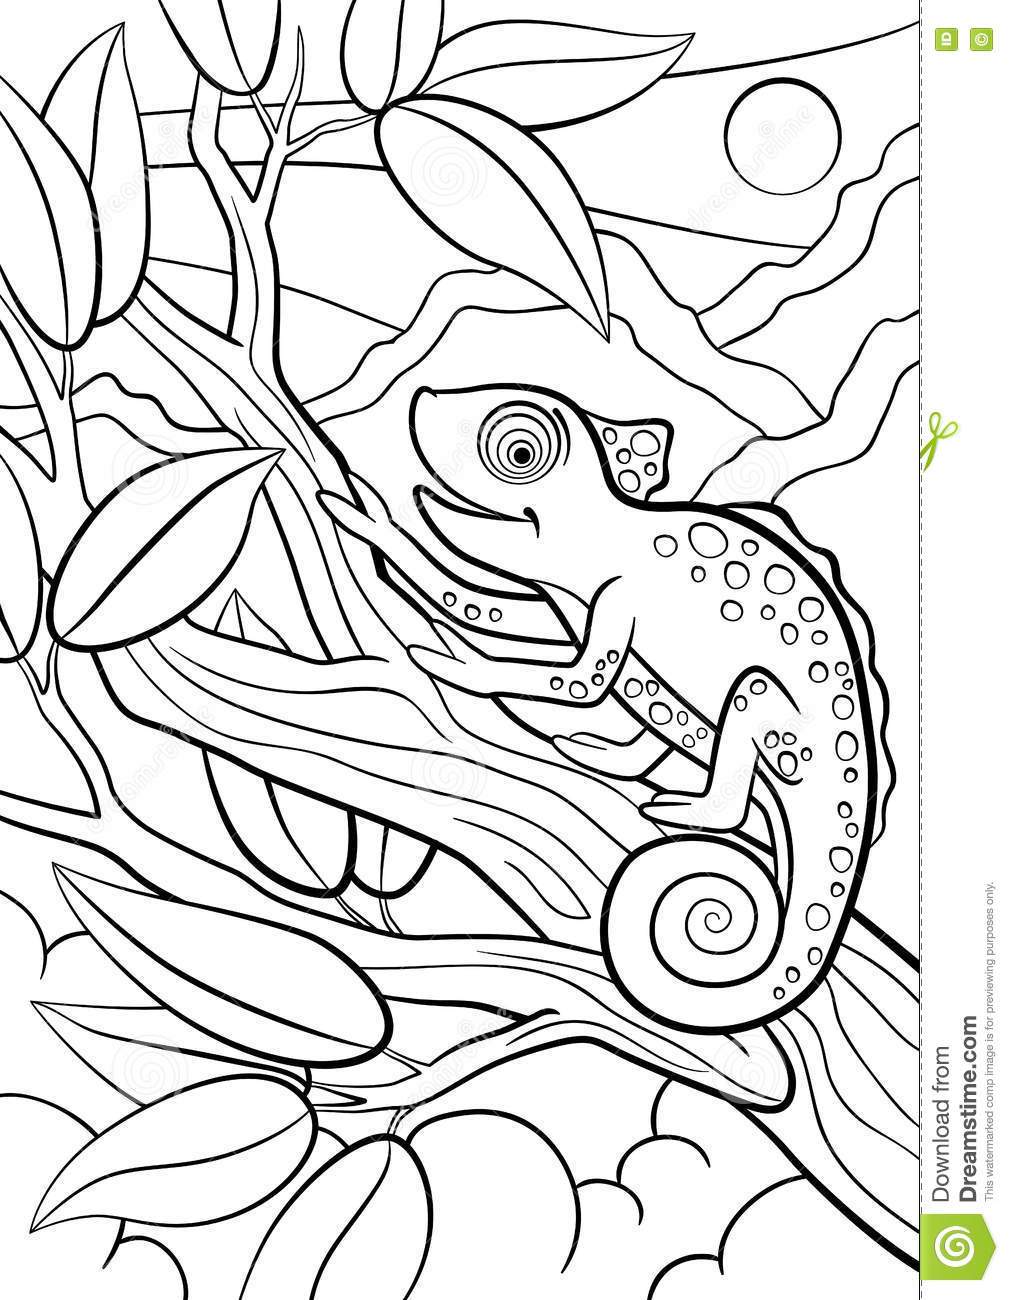 Camo Coloring Pages at GetColorings.com | Free printable colorings